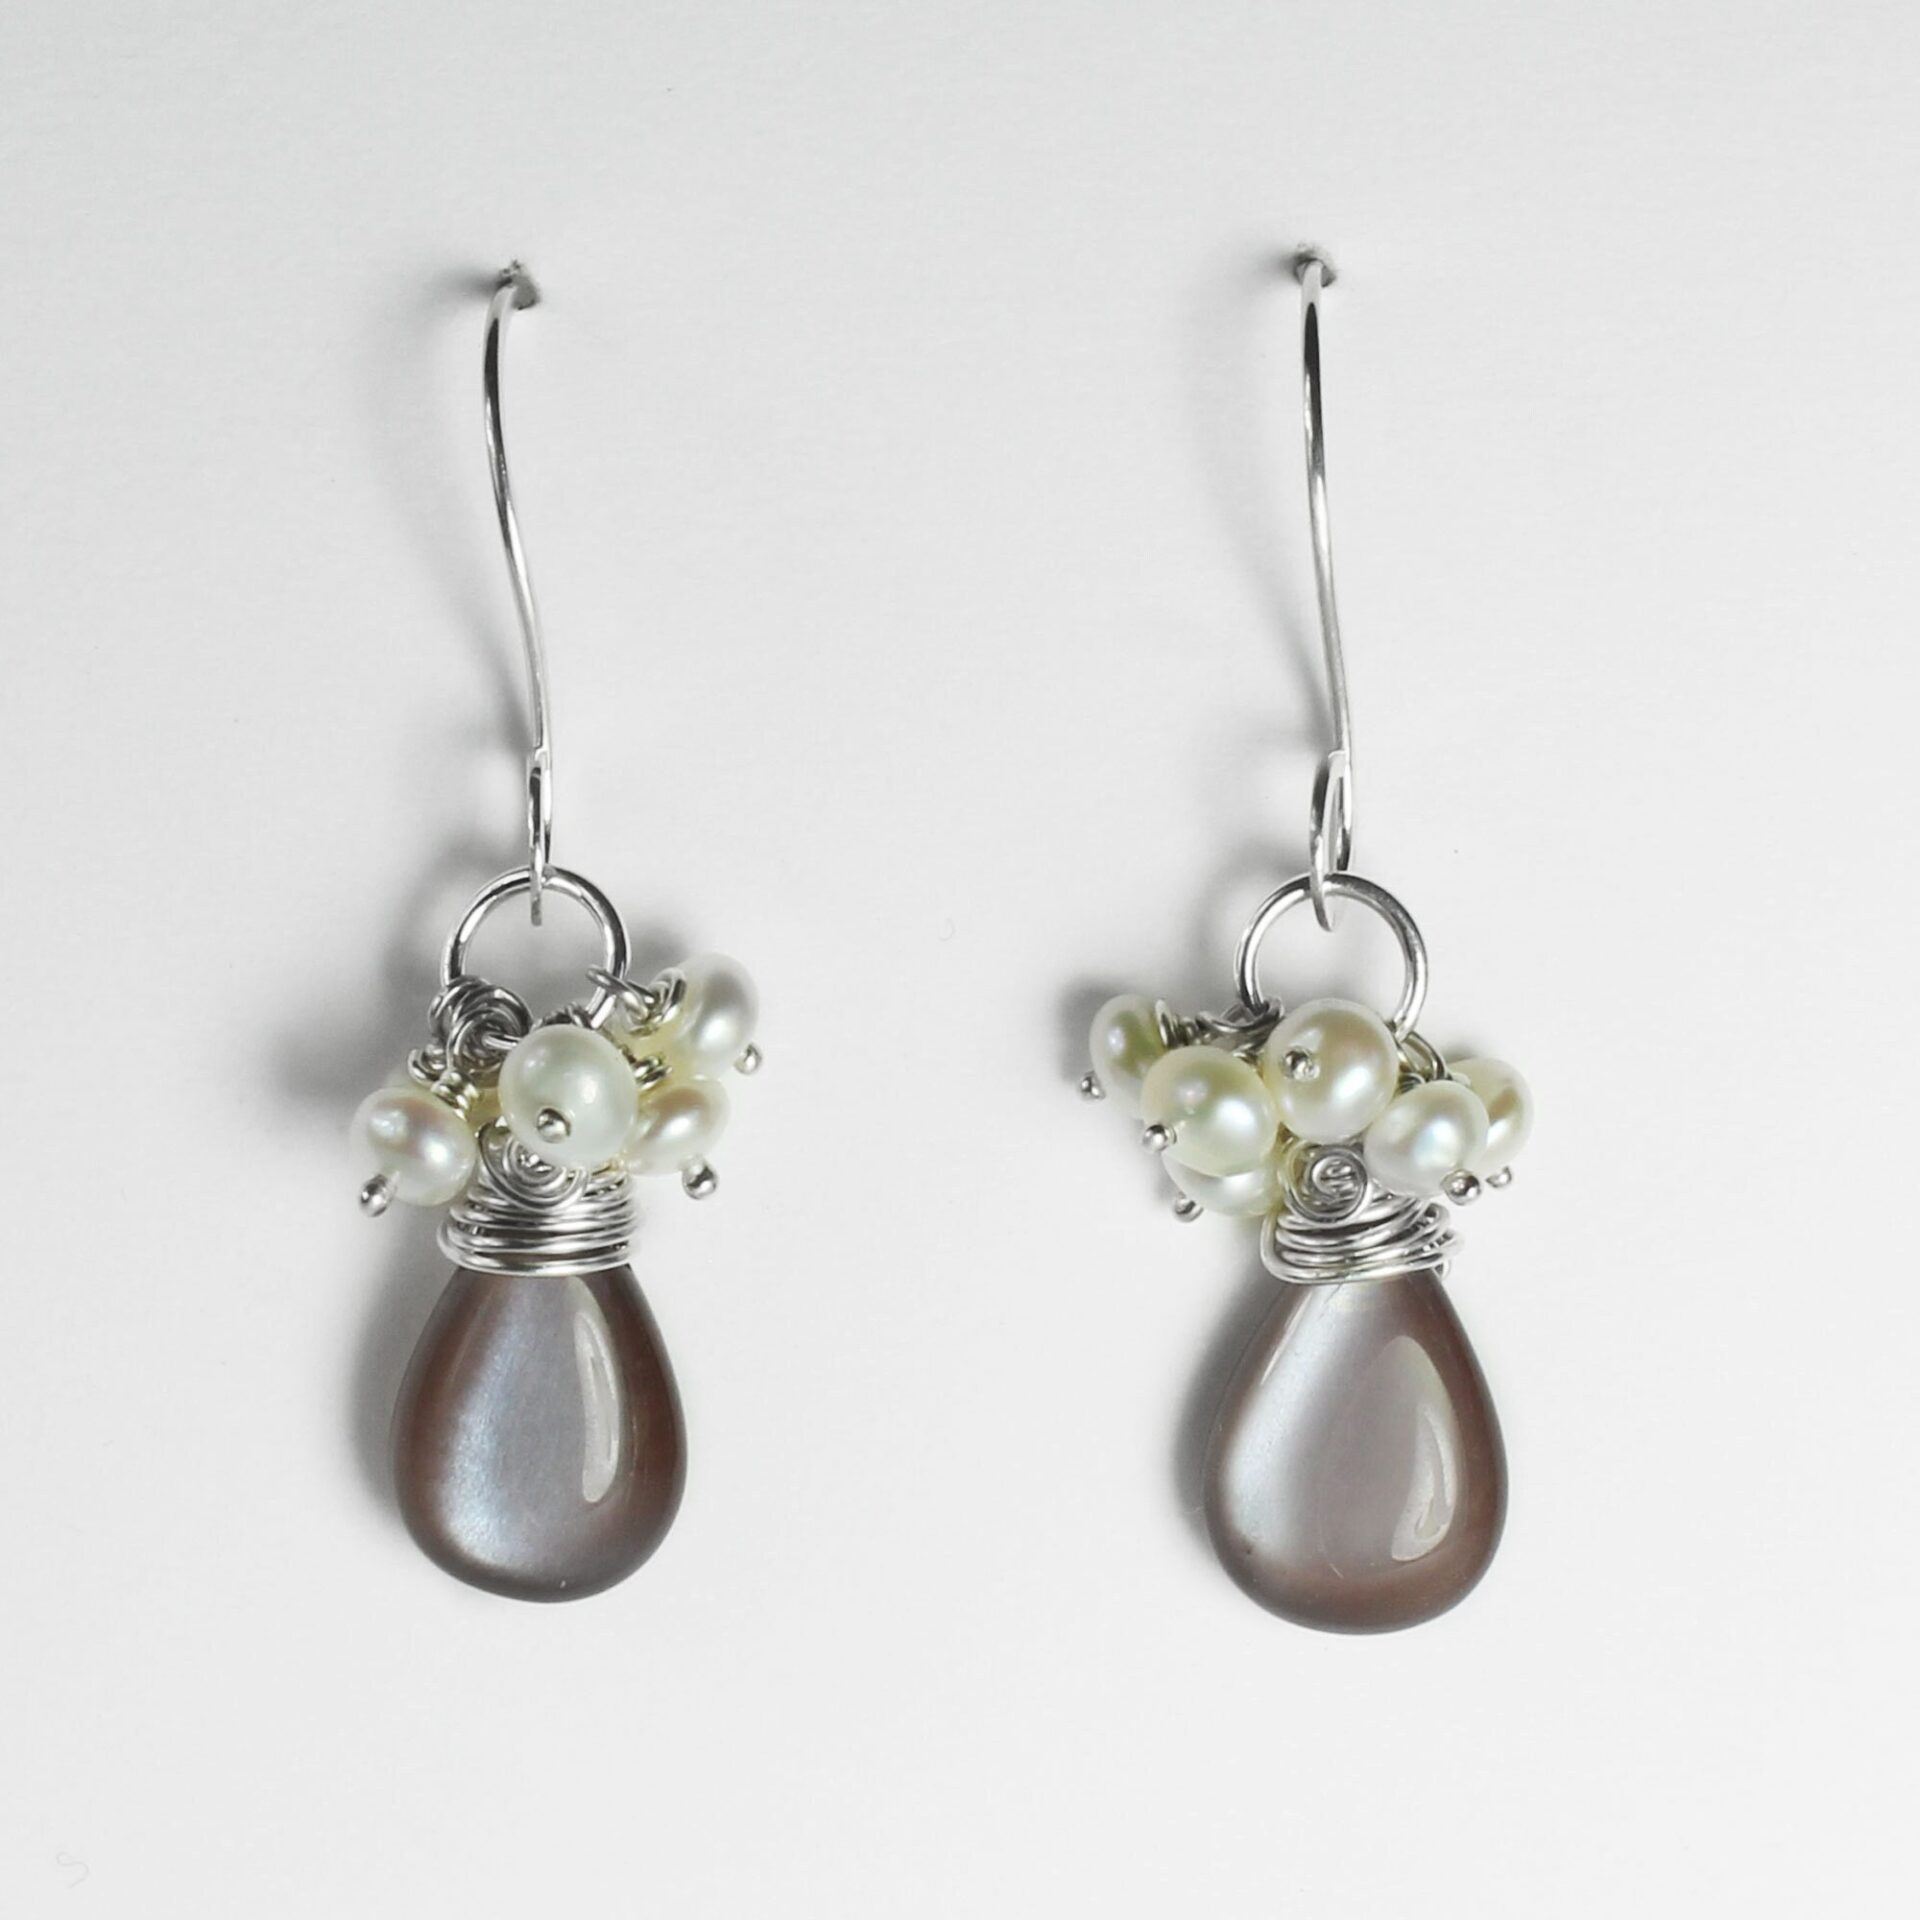 Moonstone Earrings Topped with White Pearls